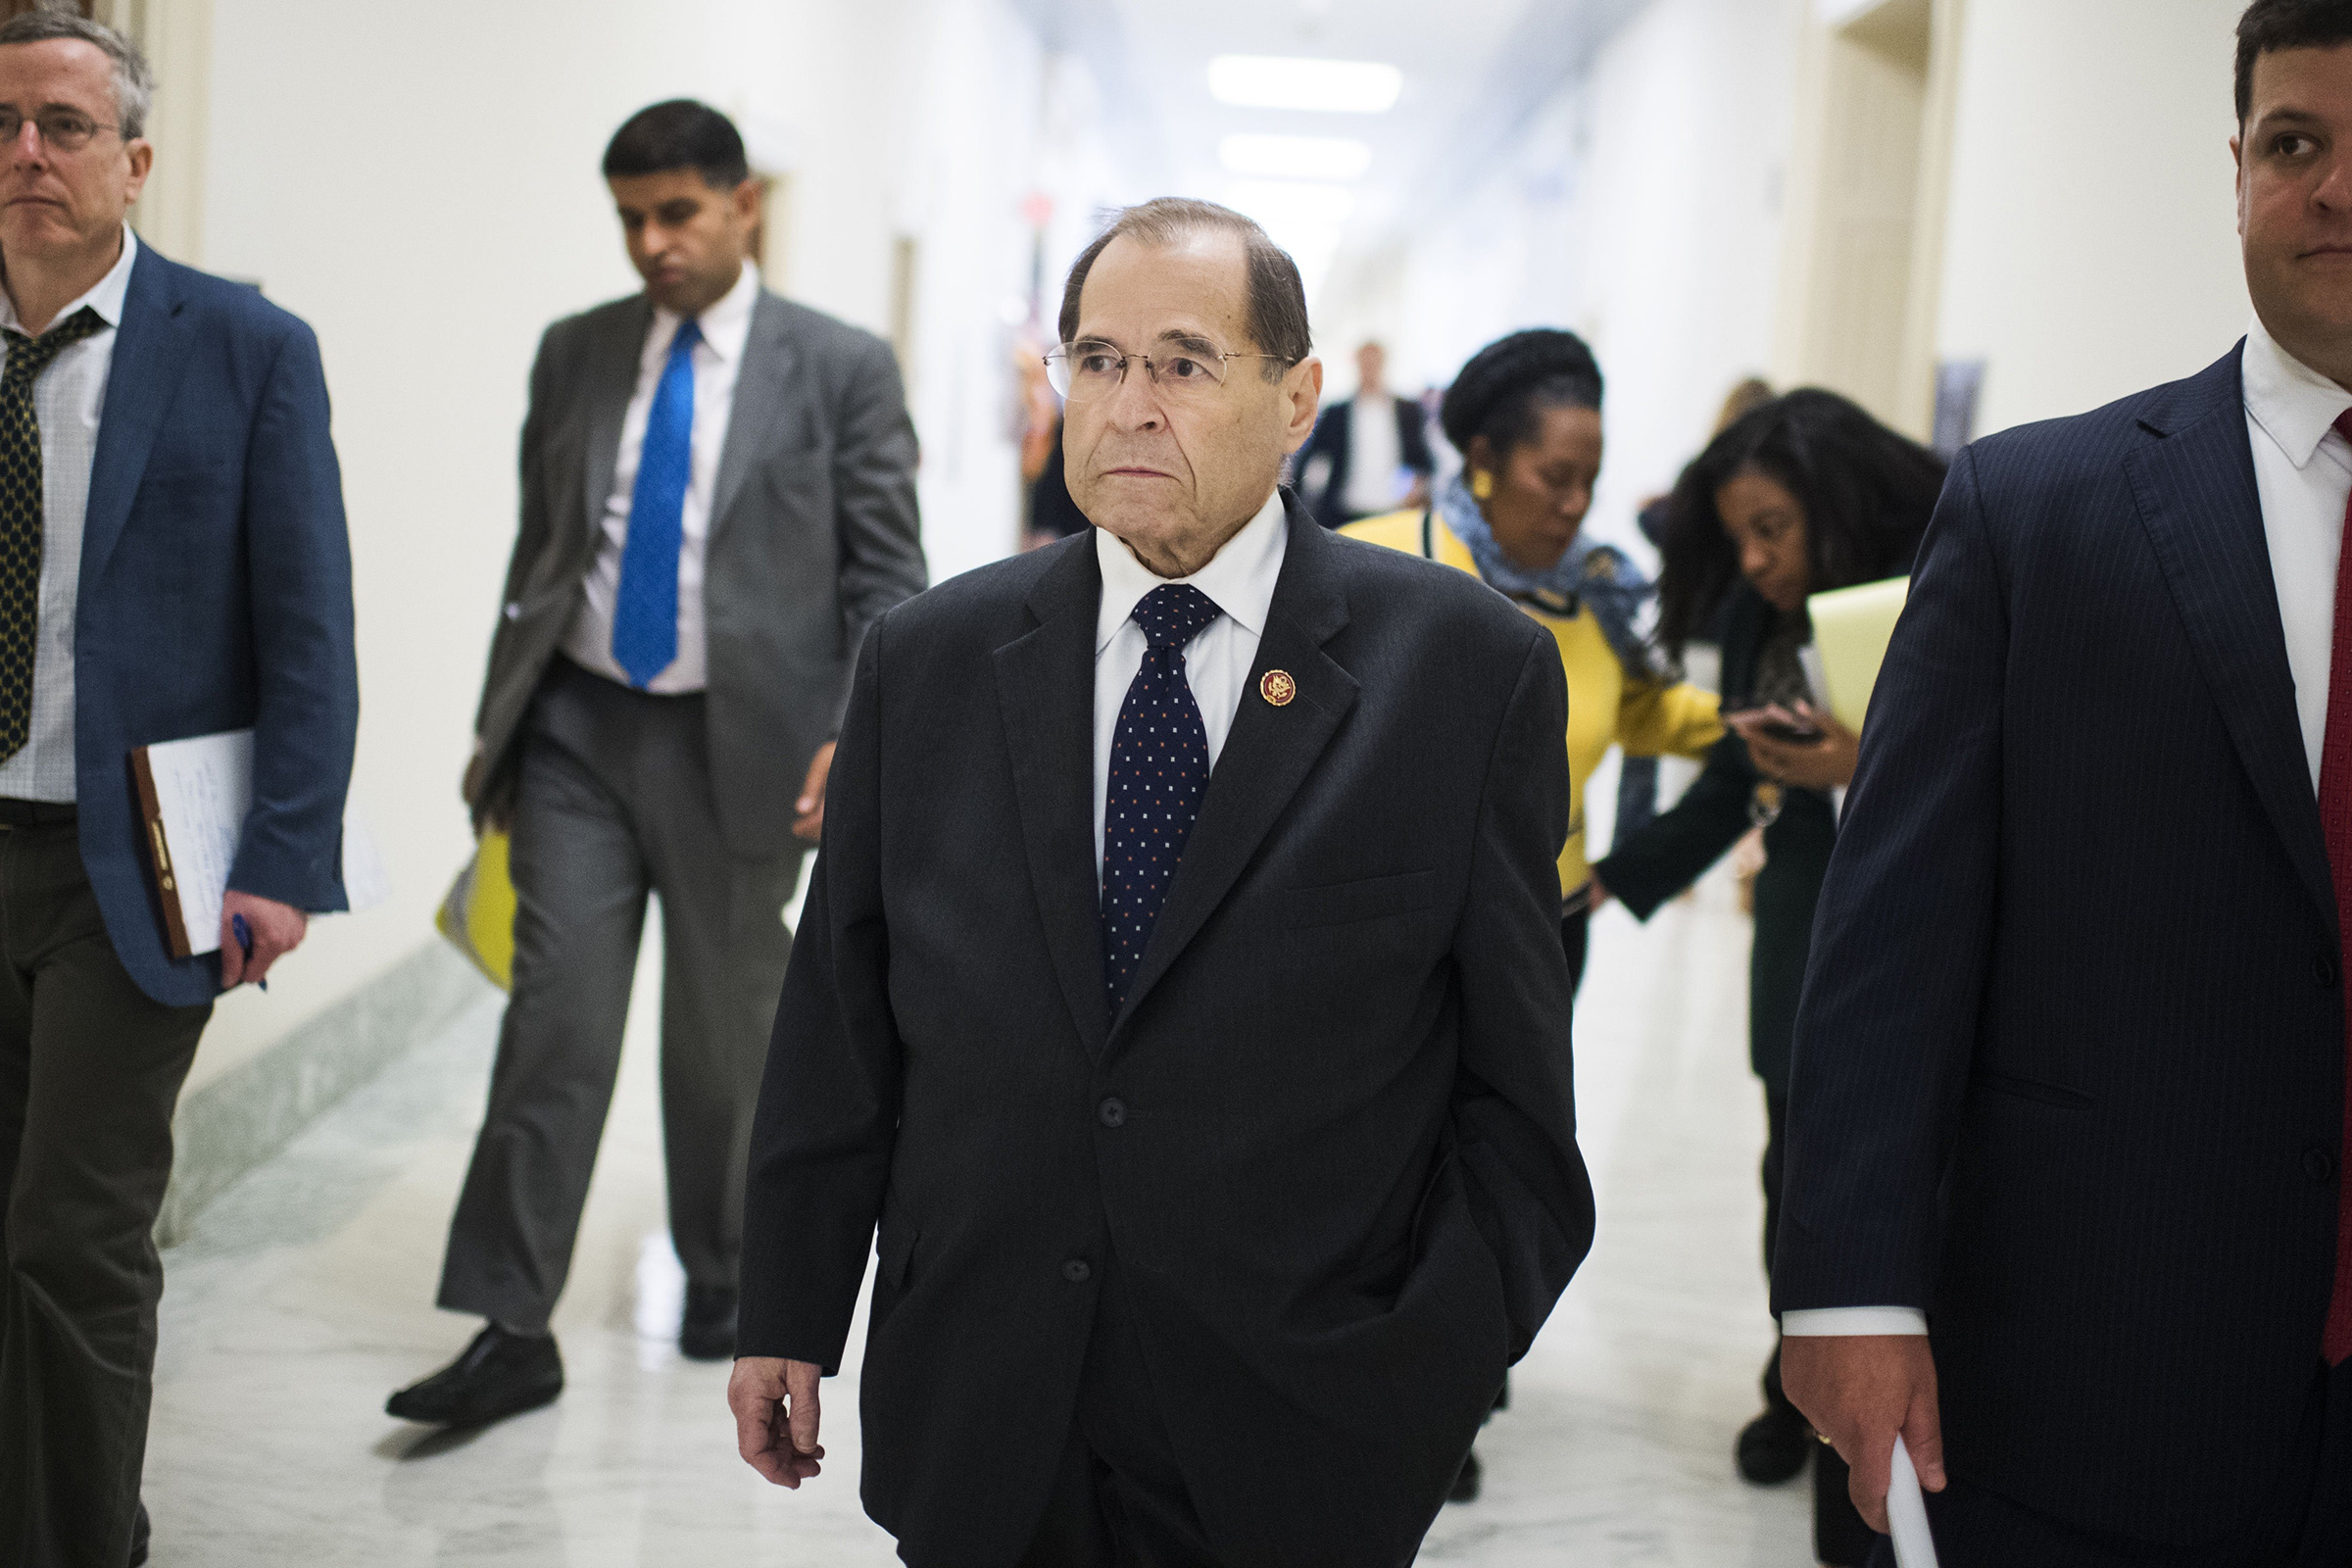 Chairman Jerrold Nadler, D-N.Y., is seen after a House Judiciary Committee hearing in Rayburn Building, Washington, D.C. on May 2, 2019.